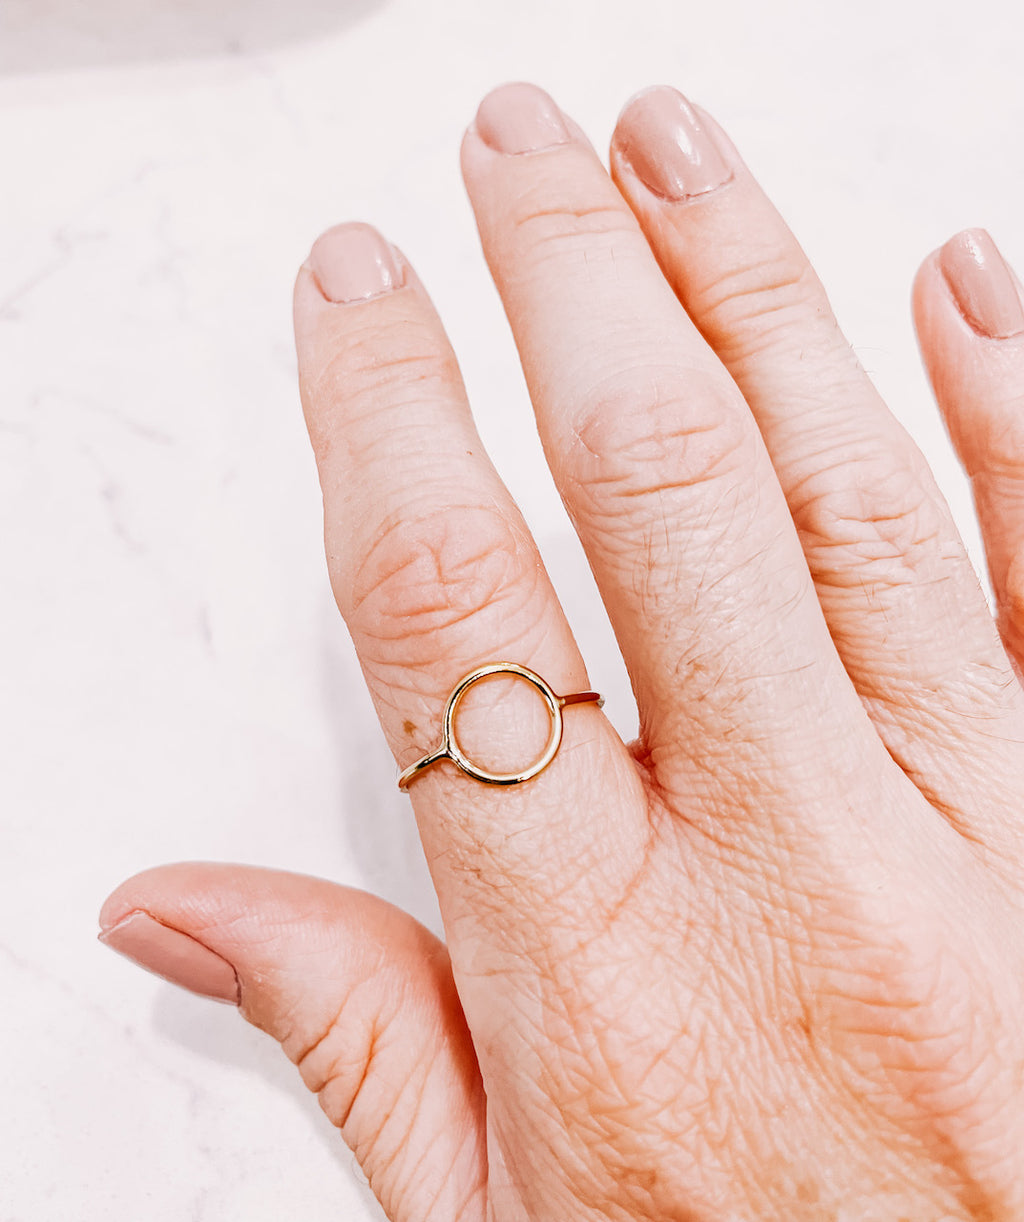 AW Boutique's Moon Gold Filled Ring on a hand.